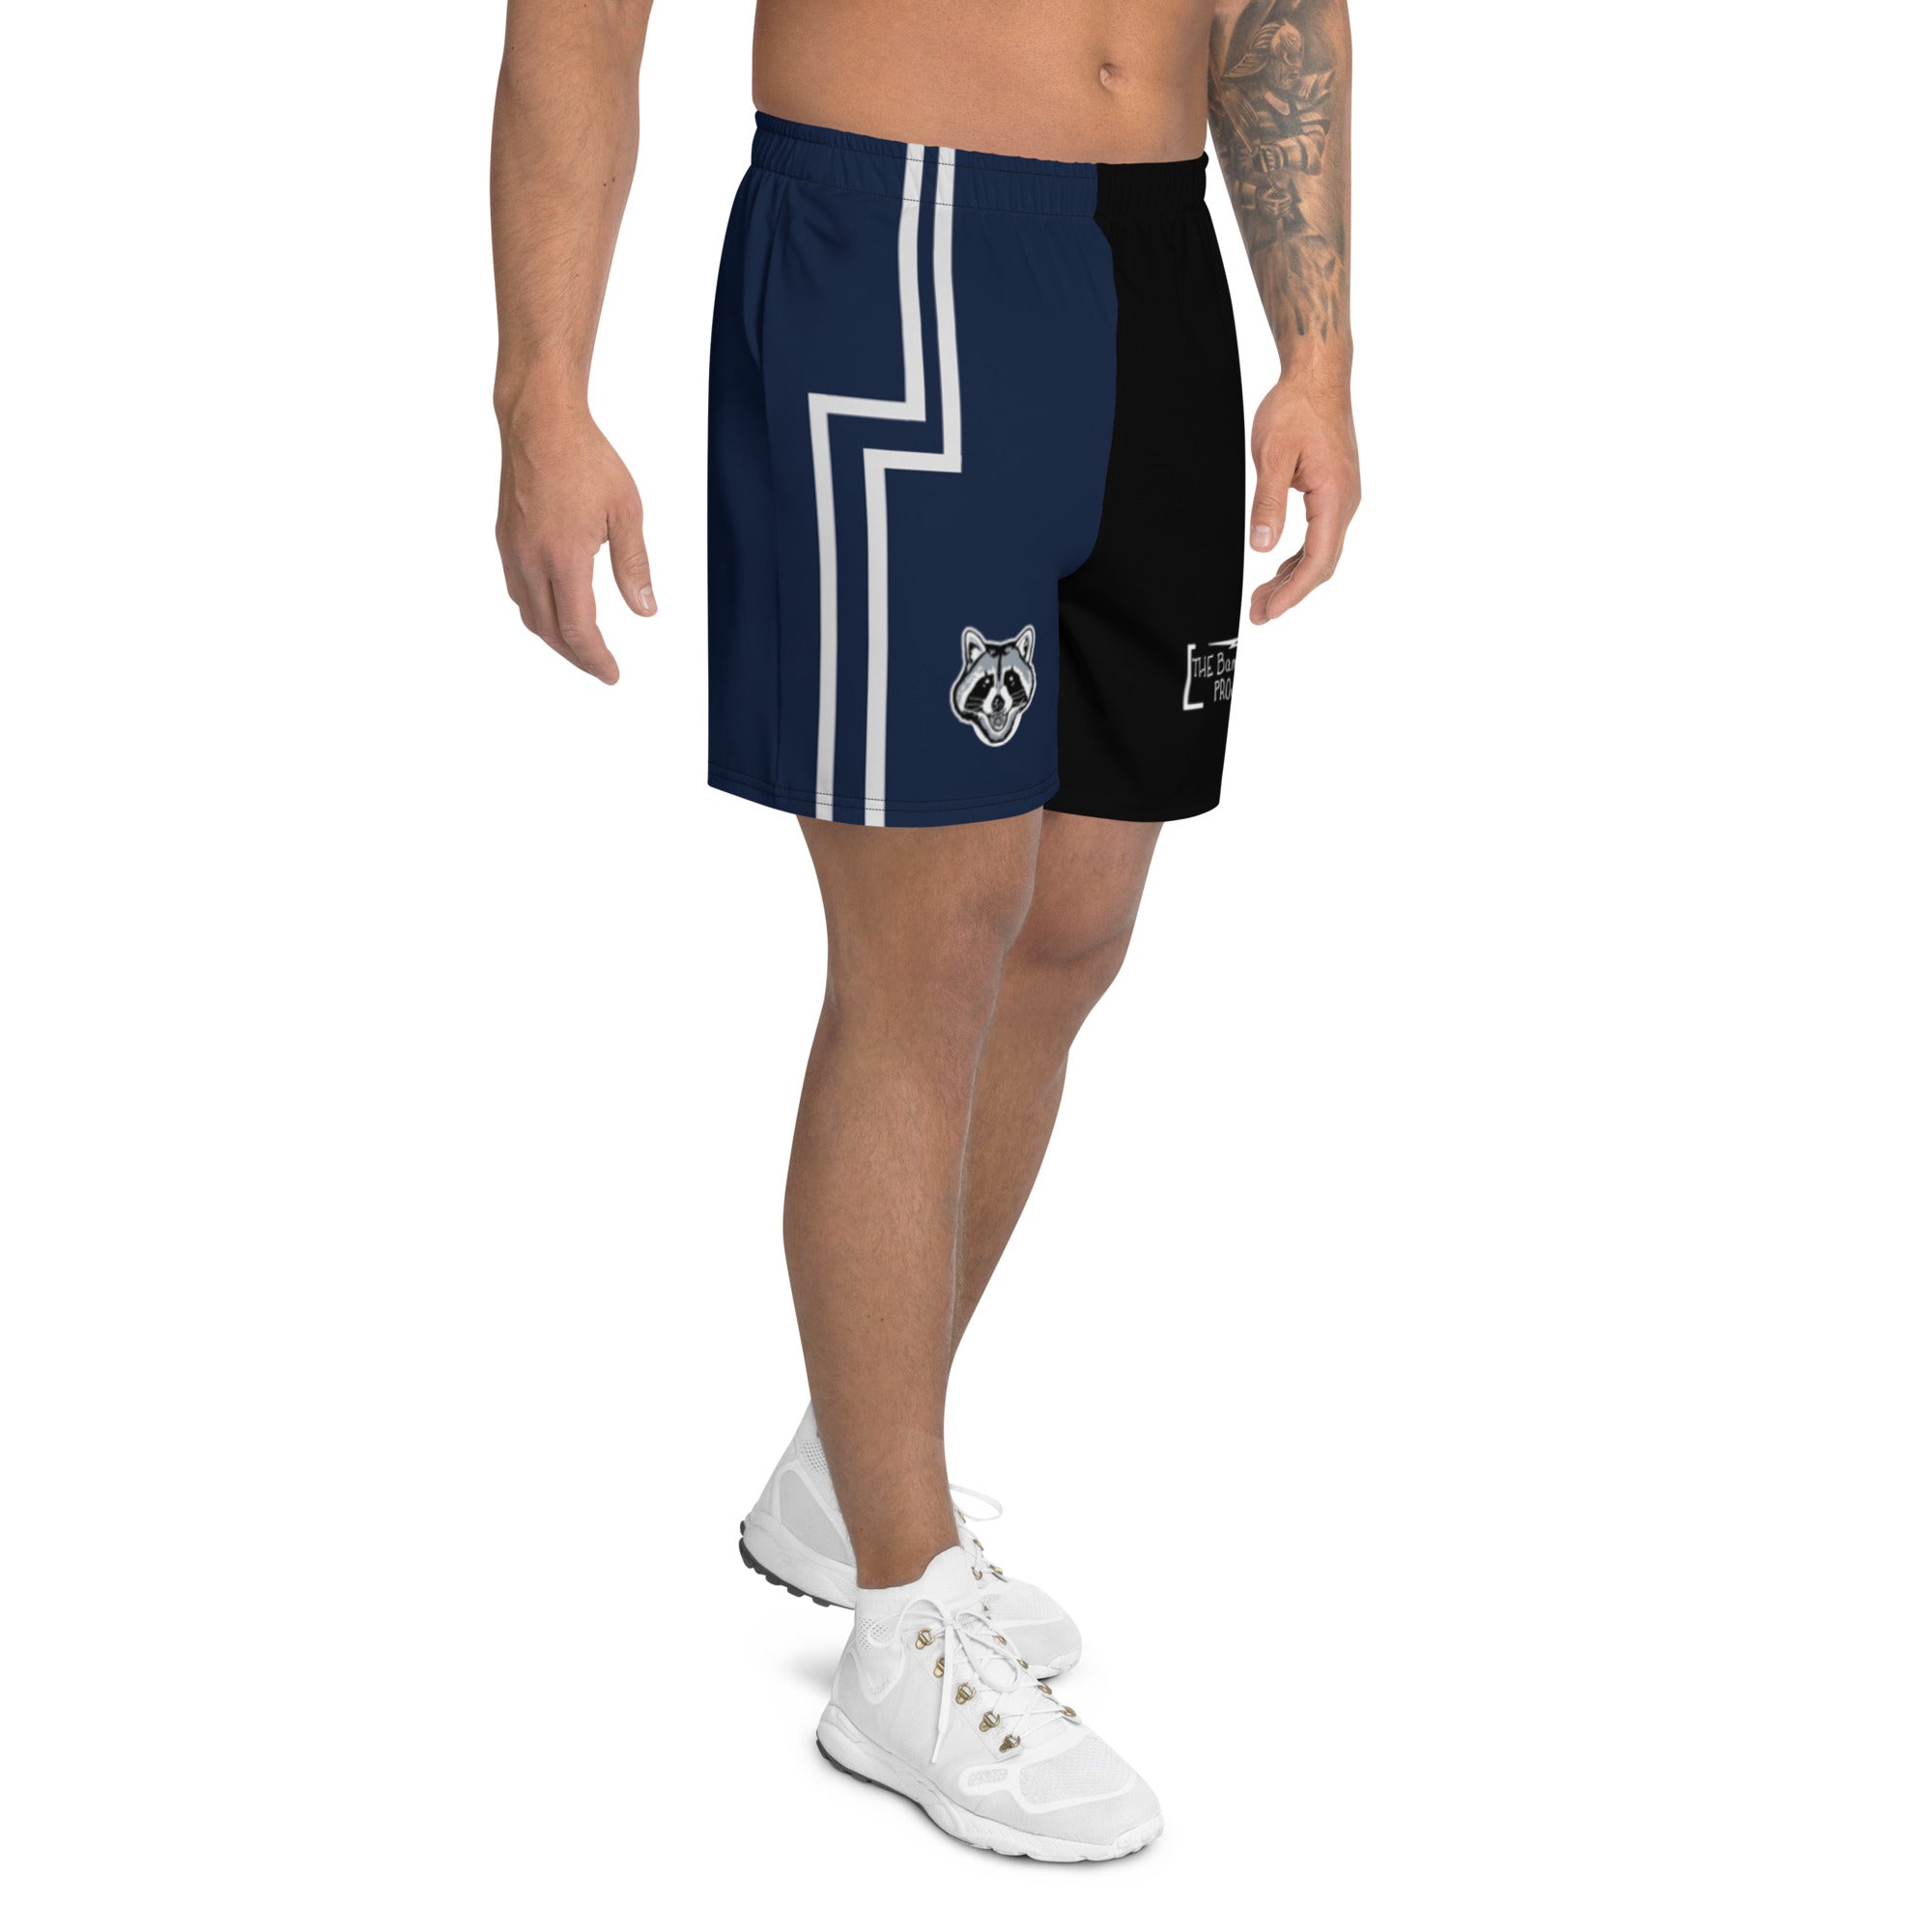 Scooter Men's Athletic Shorts